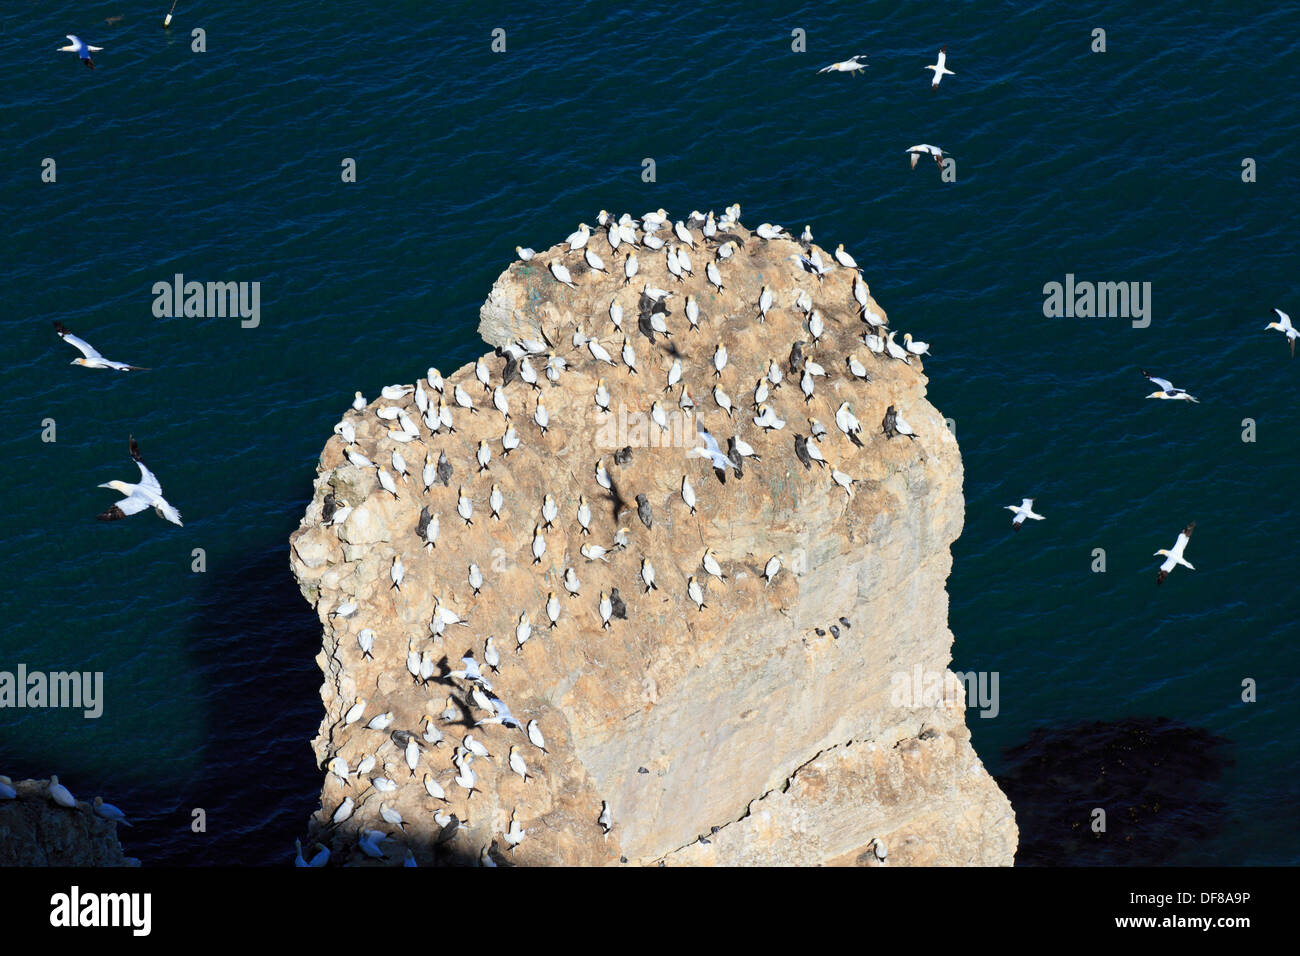 Scale Nab RSPB nature reserve, Bempton Cliffs, East Yorkshire, England, UK. Home to a gannet colony. Stock Photo